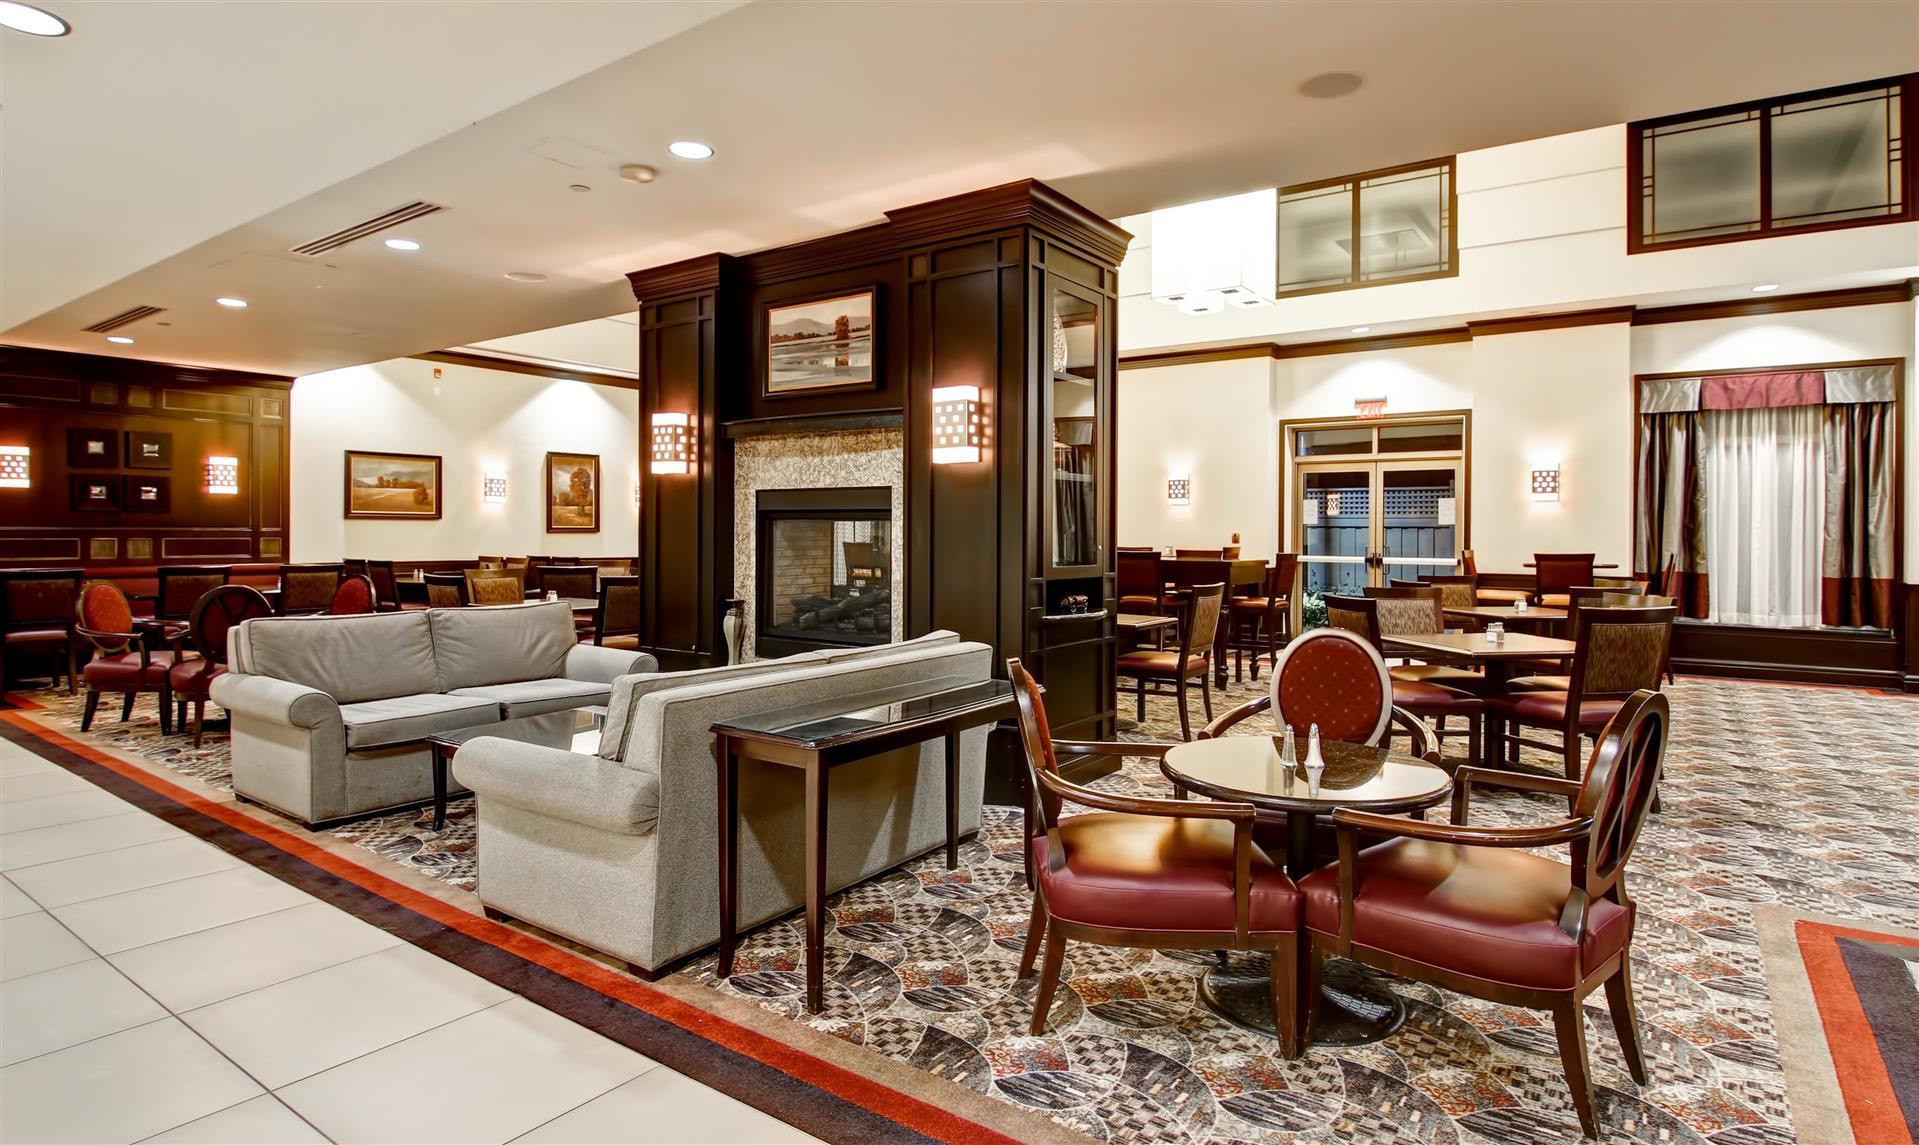 Homewood Suites by Hilton Toronto Airport Corporate Centre in Toronto, ON